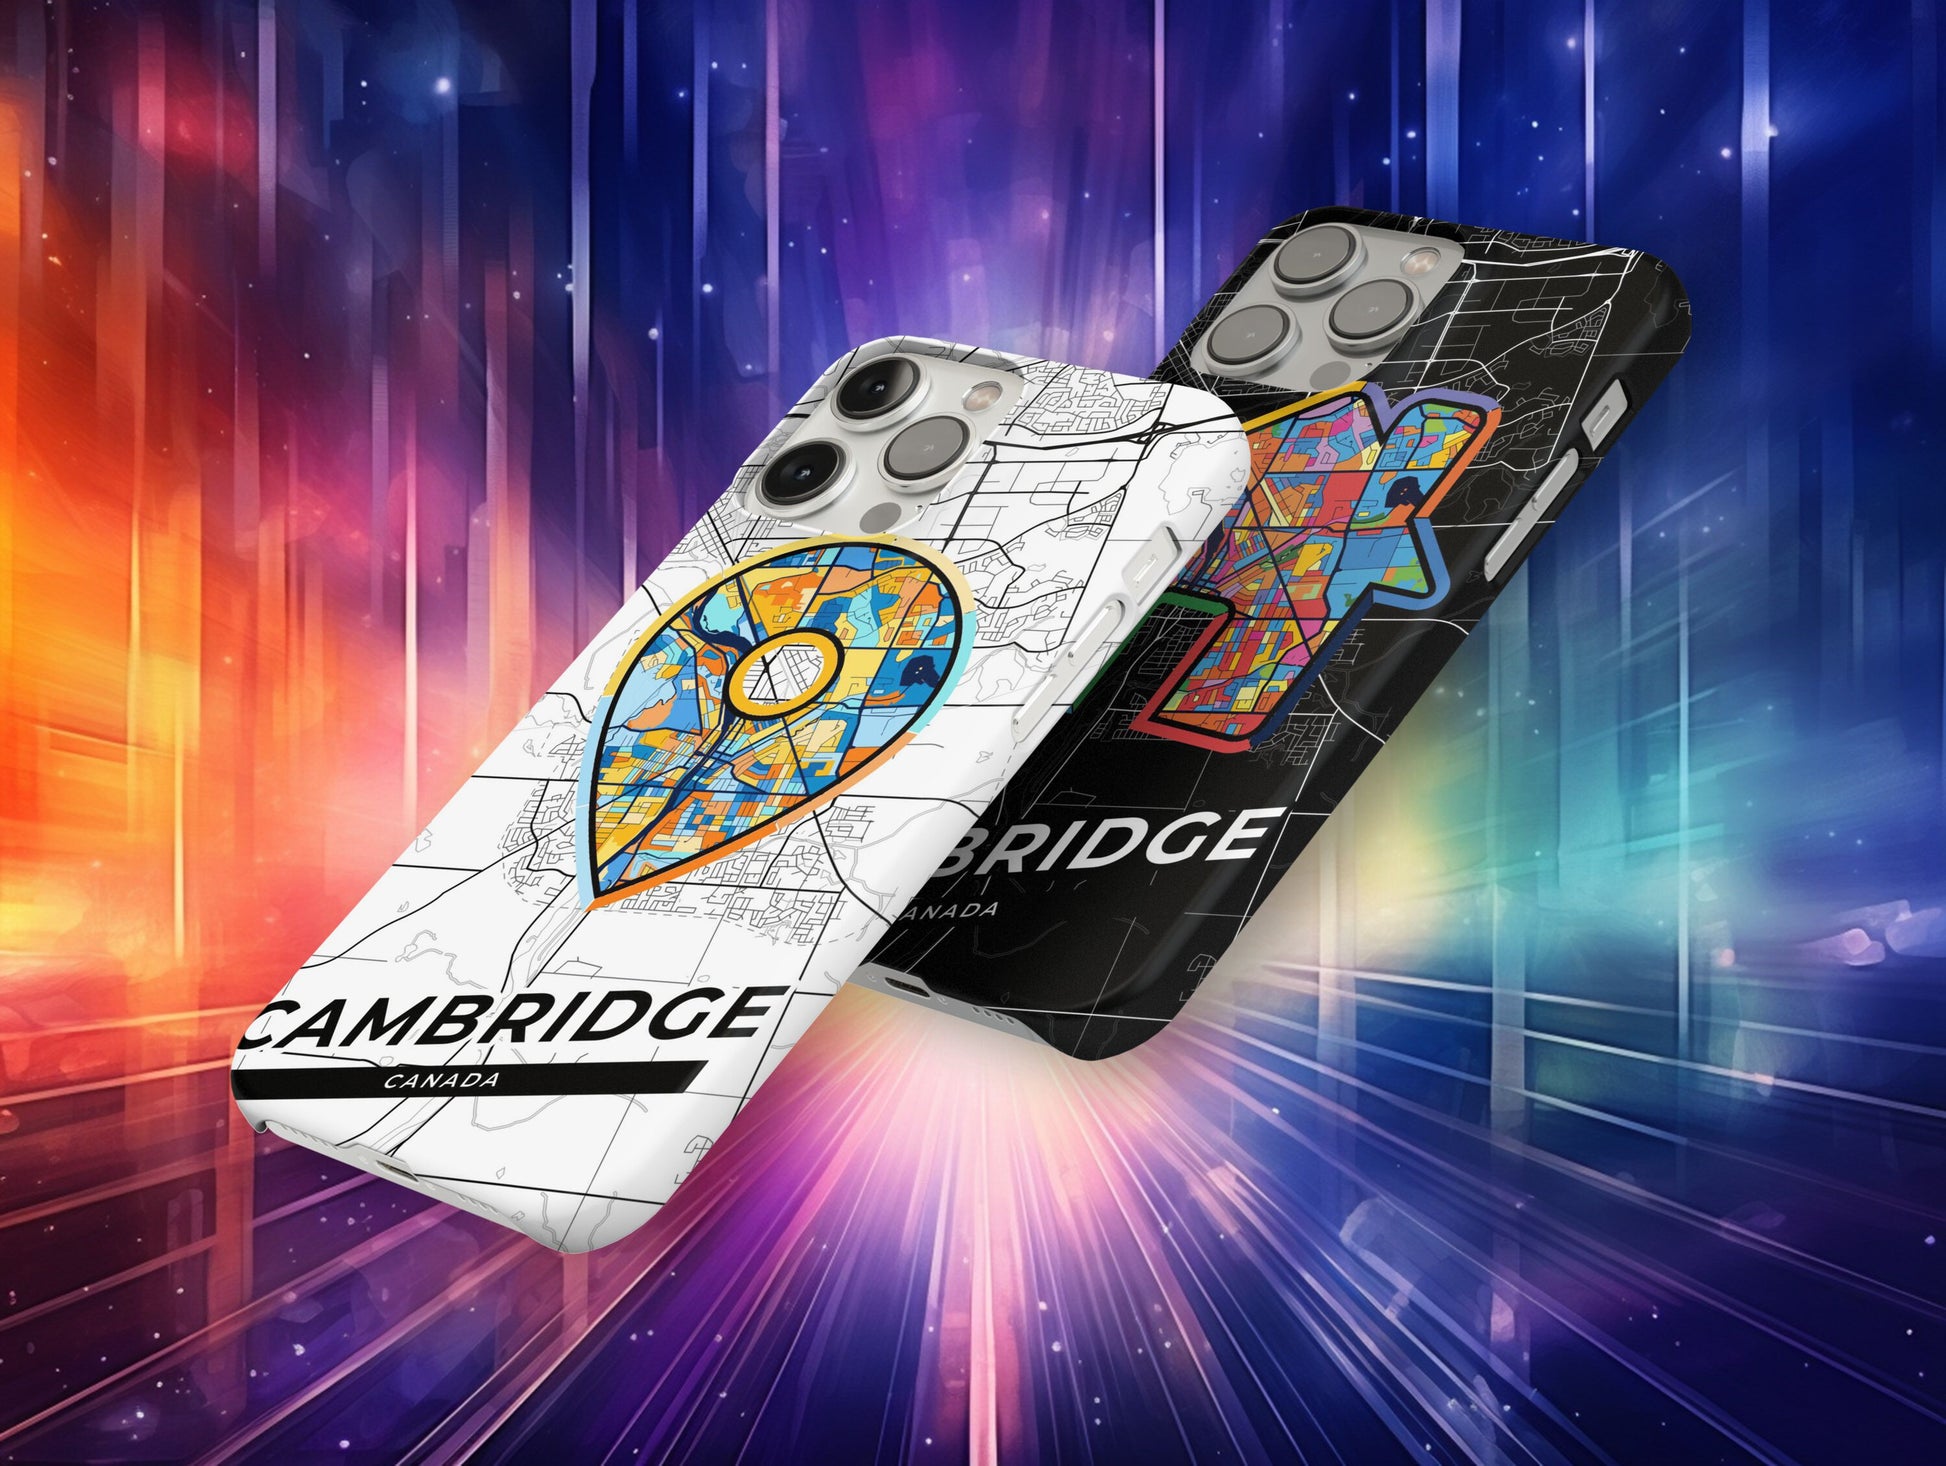 Cambridge Canada slim phone case with colorful icon. Birthday, wedding or housewarming gift. Couple match cases.